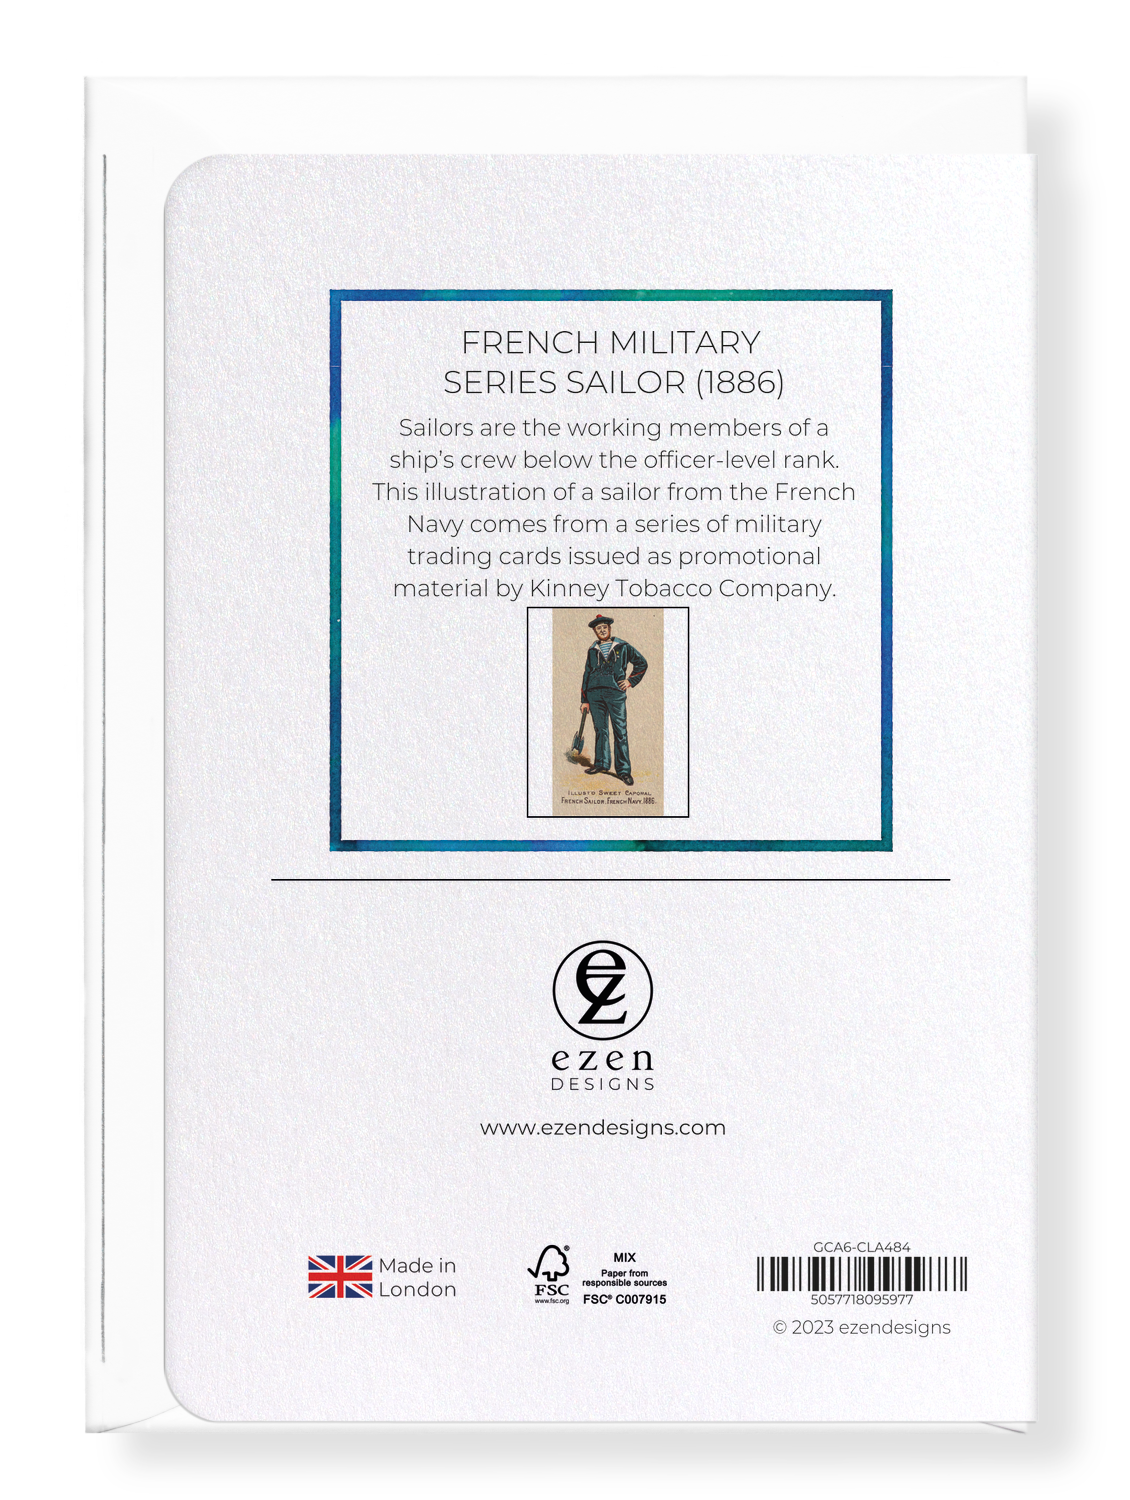 Ezen Designs - French Military Series Sailor (1886) - Greeting Card - Back